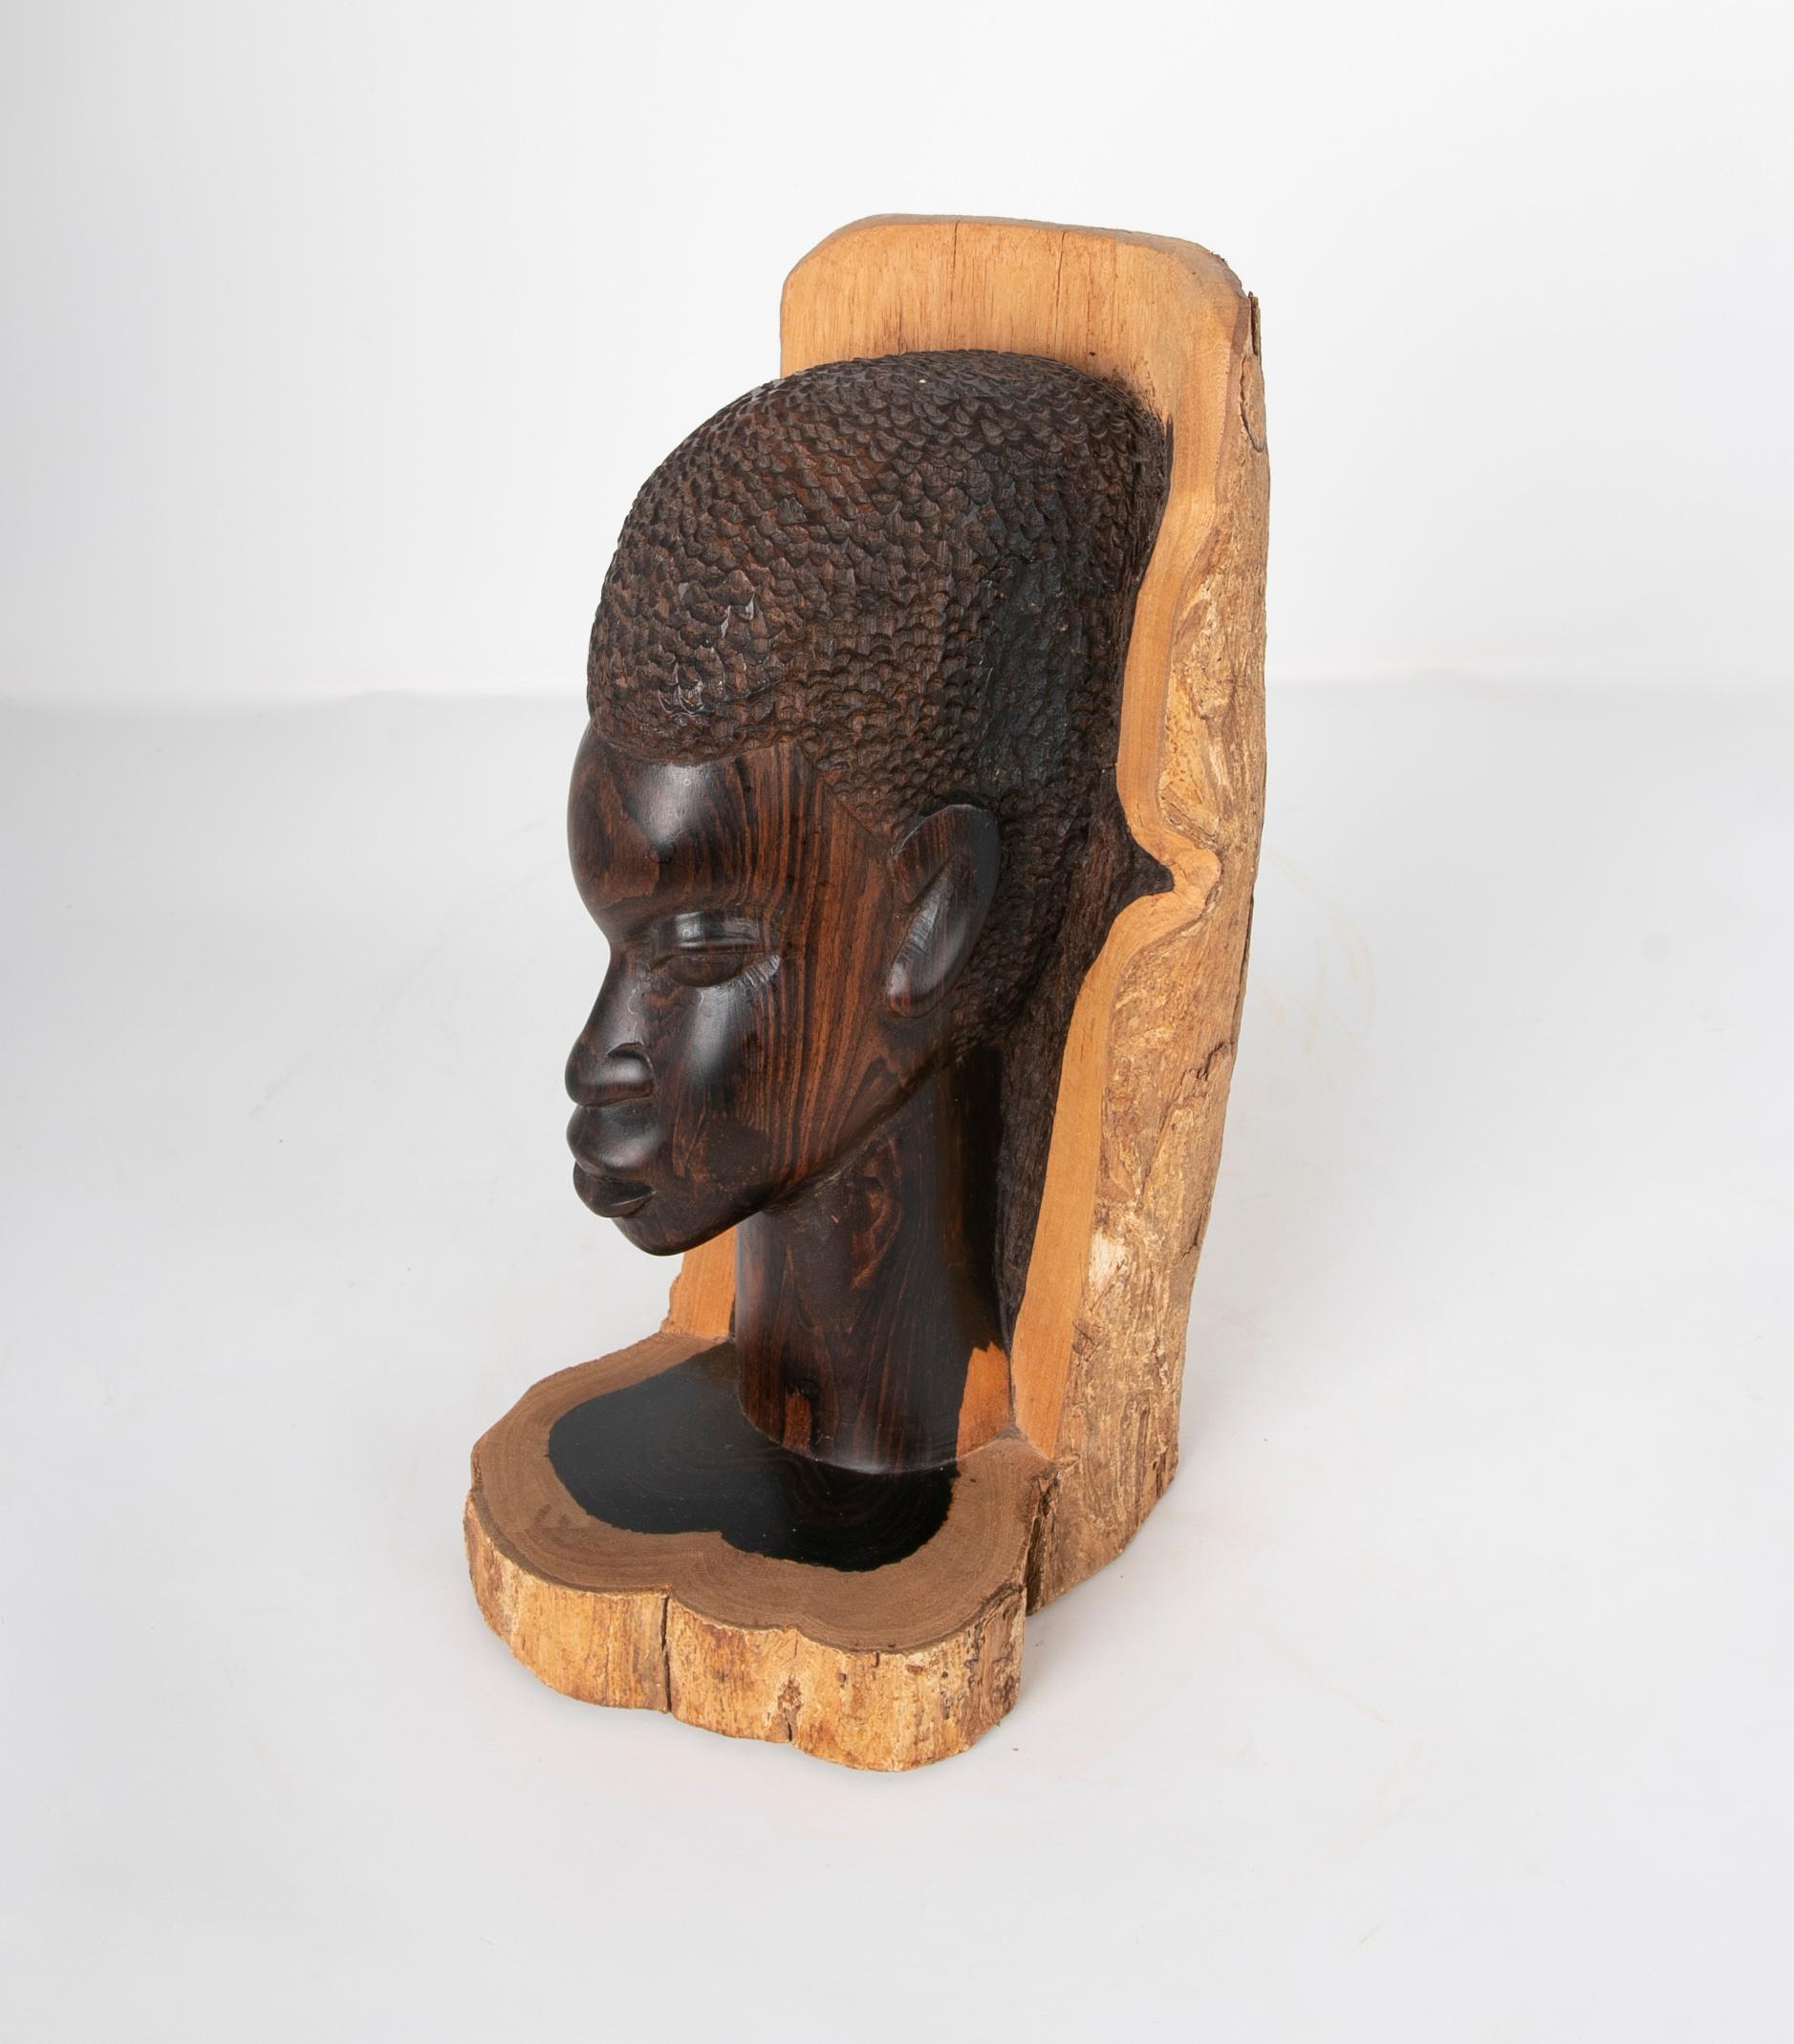 20th Century Wood-Carved Sculpture of a Tanzanian Woman Signed and Dated 1922 For Sale